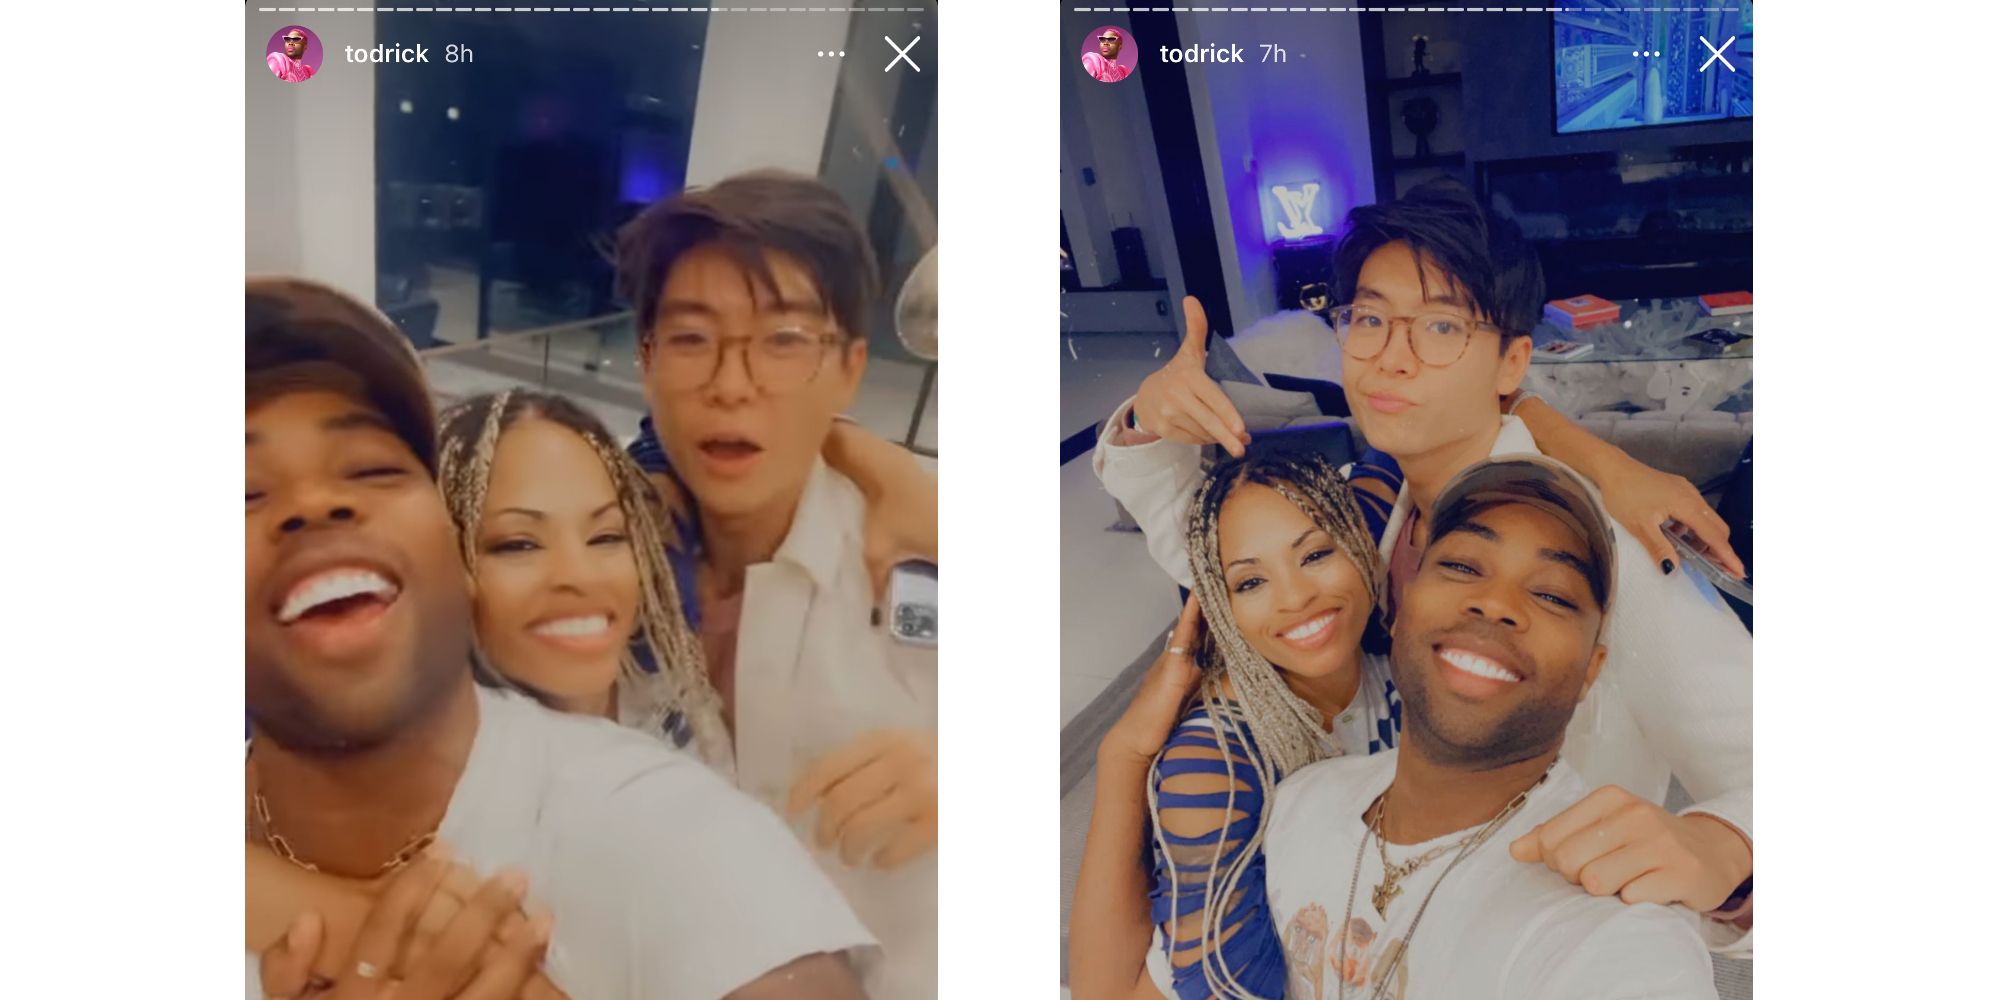 Derek Xiao and Tiffany Mitchell from Big Brother 23 alongside Todrick Hall